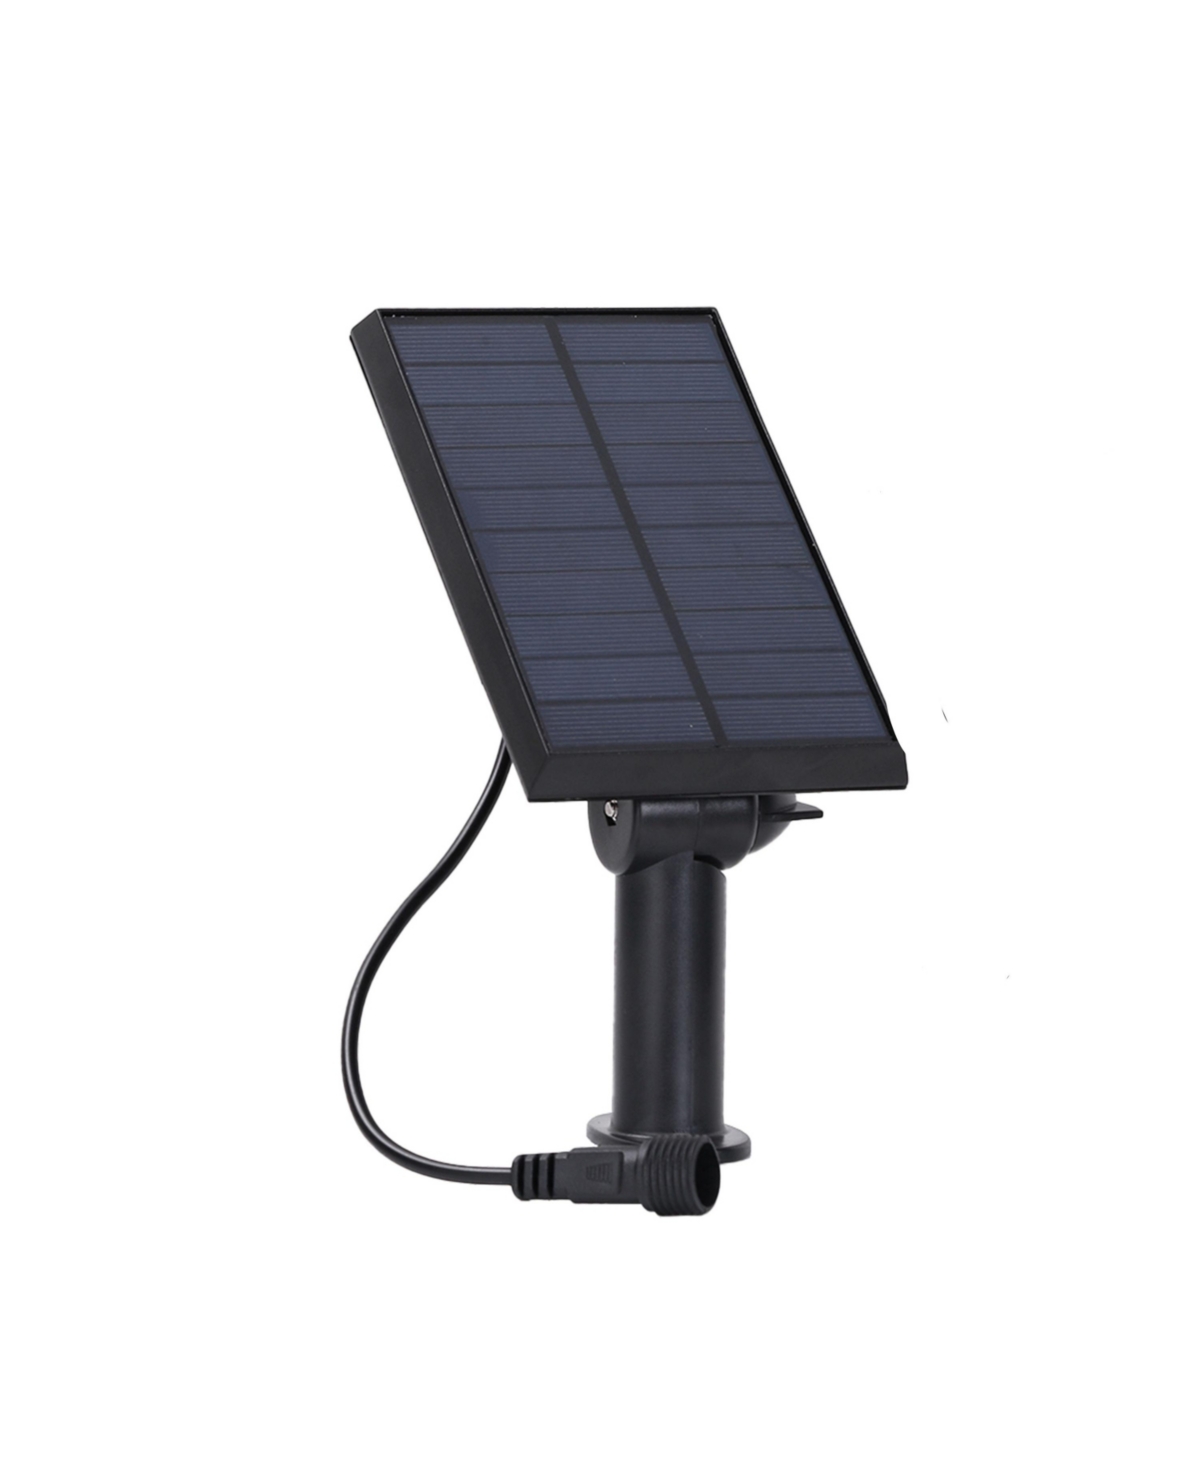 Ambience Pro Solar Replacement Panel for Remote String Lights Only - Black